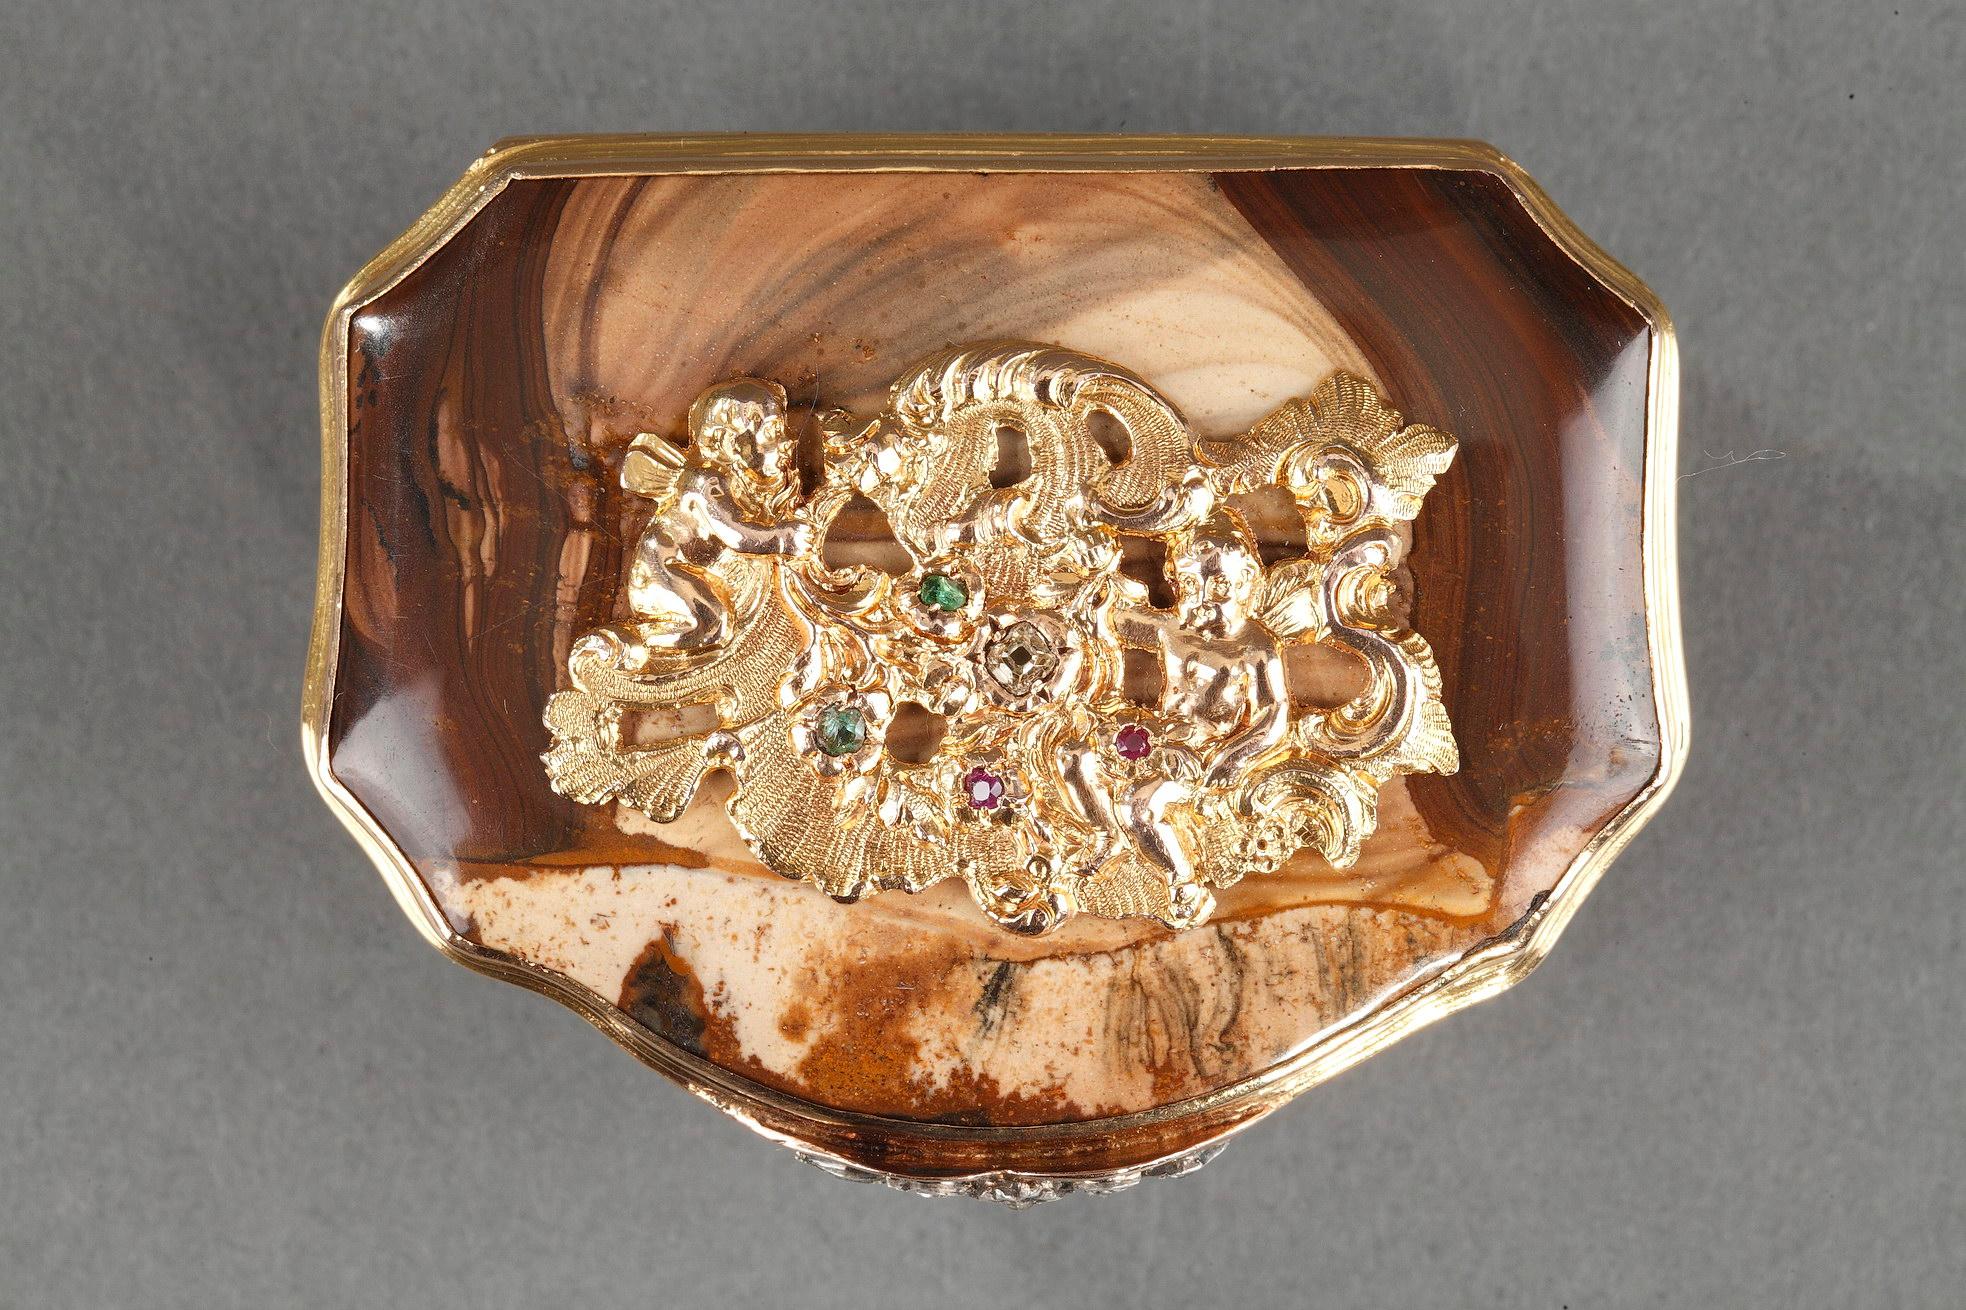 Gold, Agate and Gemstones Snuffbox, 18th Century 1